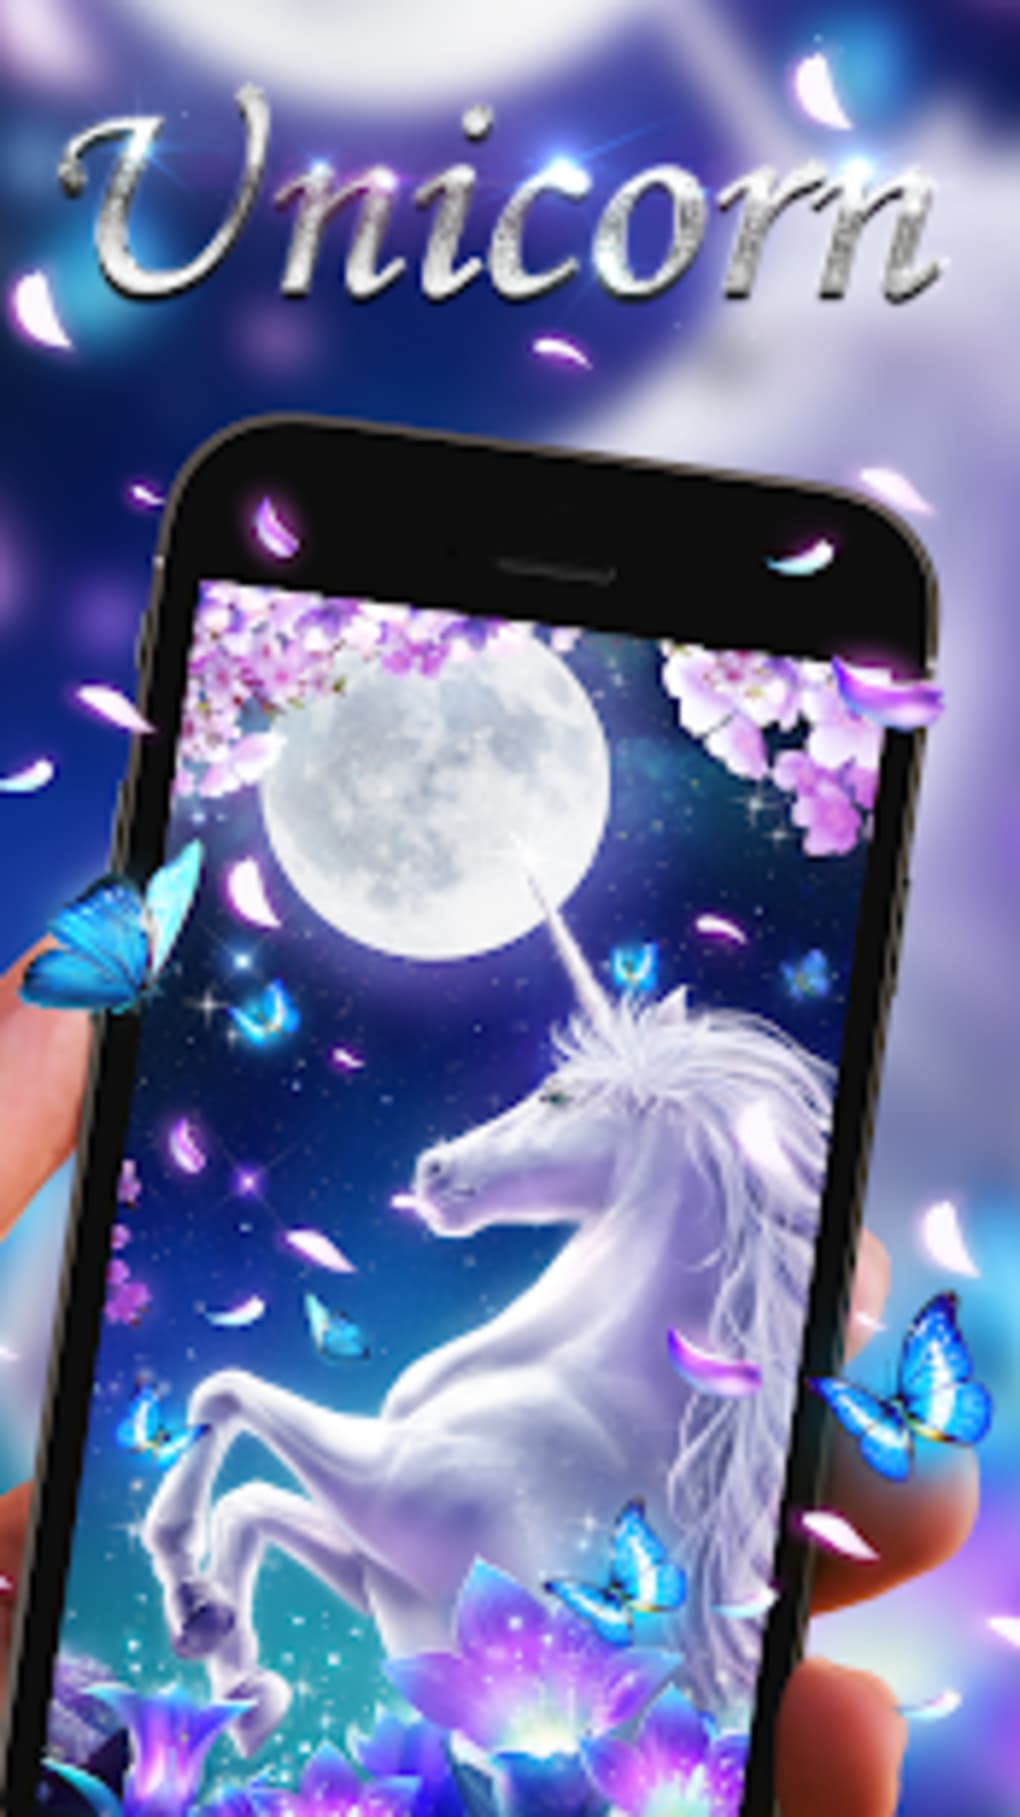 Graceful Unicorn Live Wallpaper APK for Android - Download